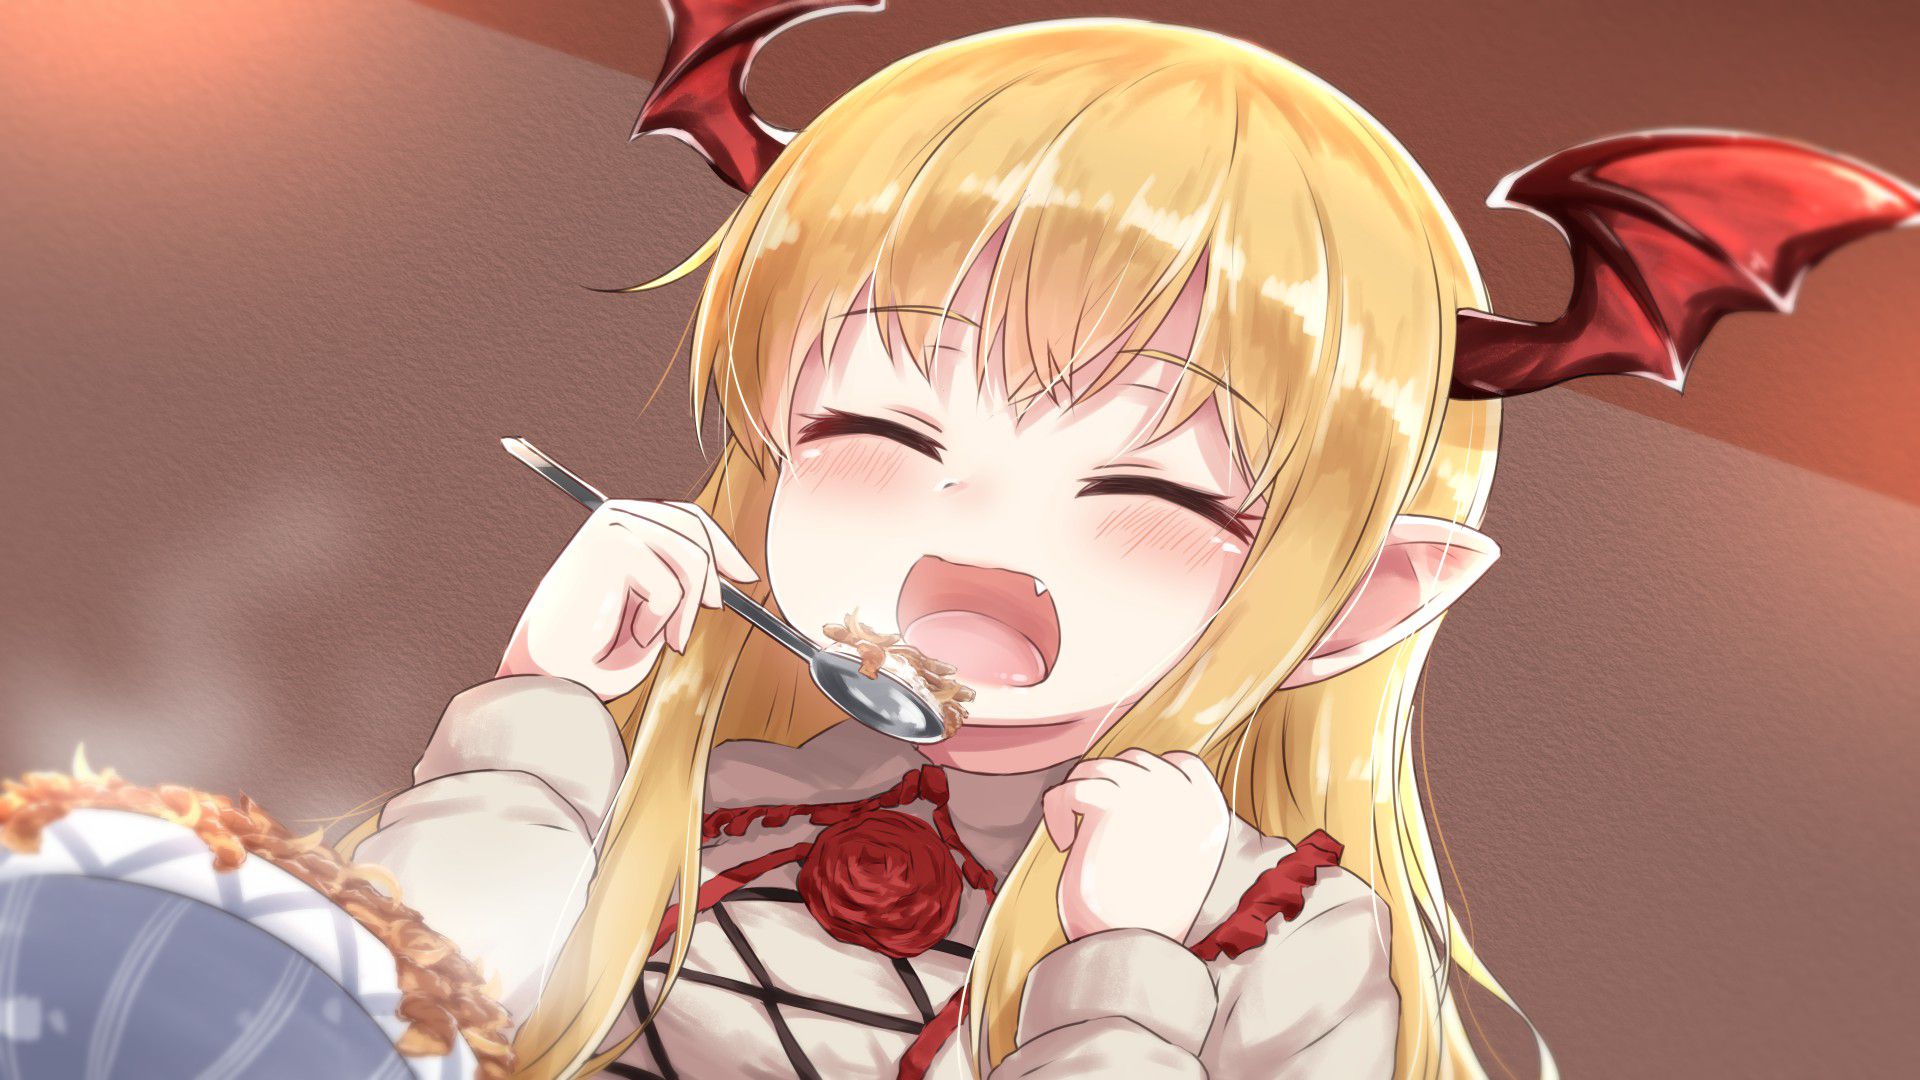 Secondary image summary of the girl eating delicious food! 21